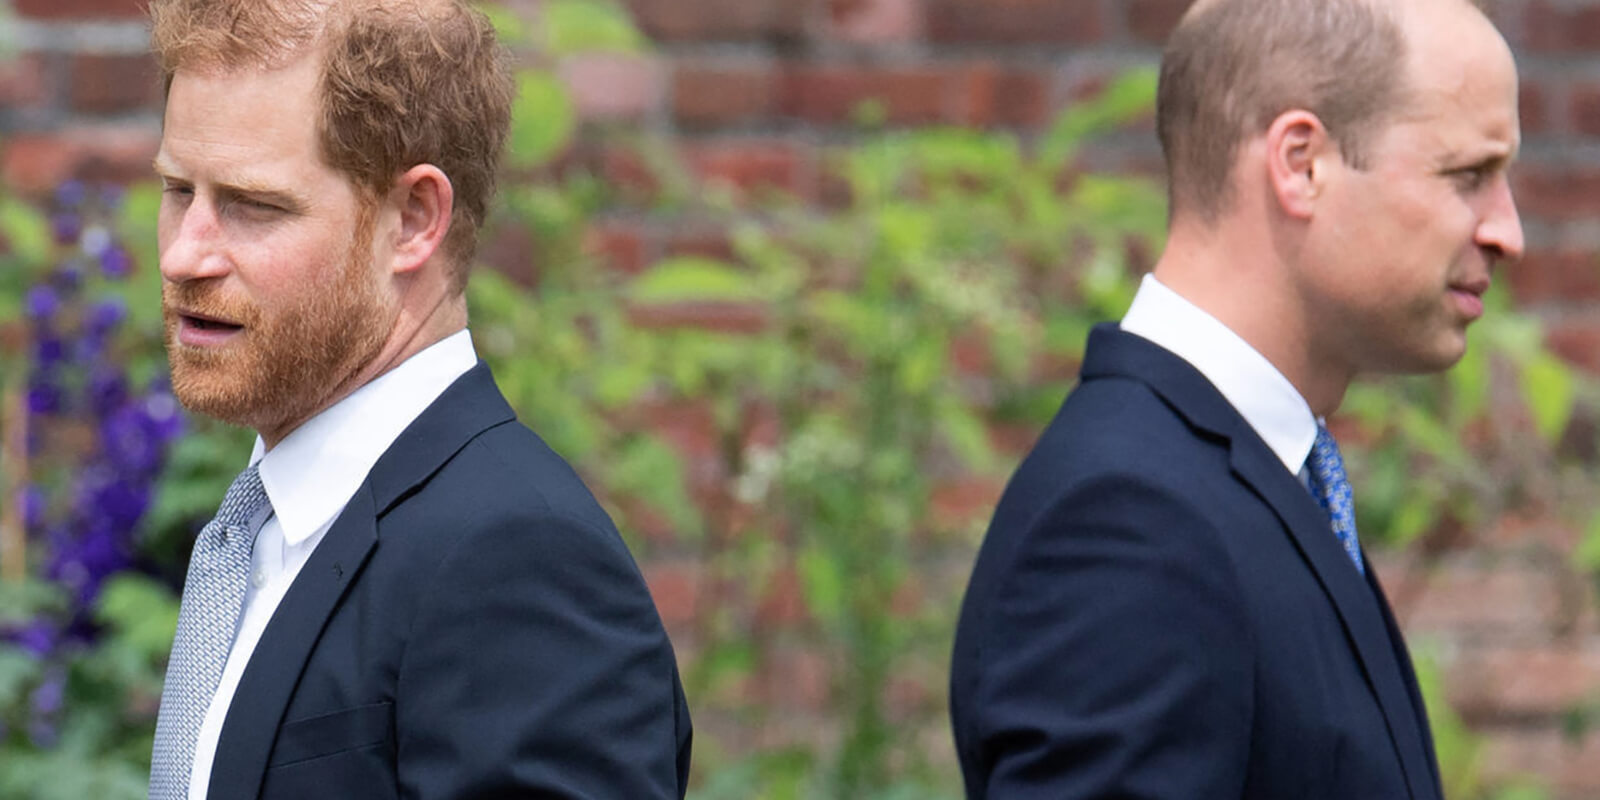 Prince Harry and Prince William at the unveiling of a statue honoring their mother, the late Princess Diana.